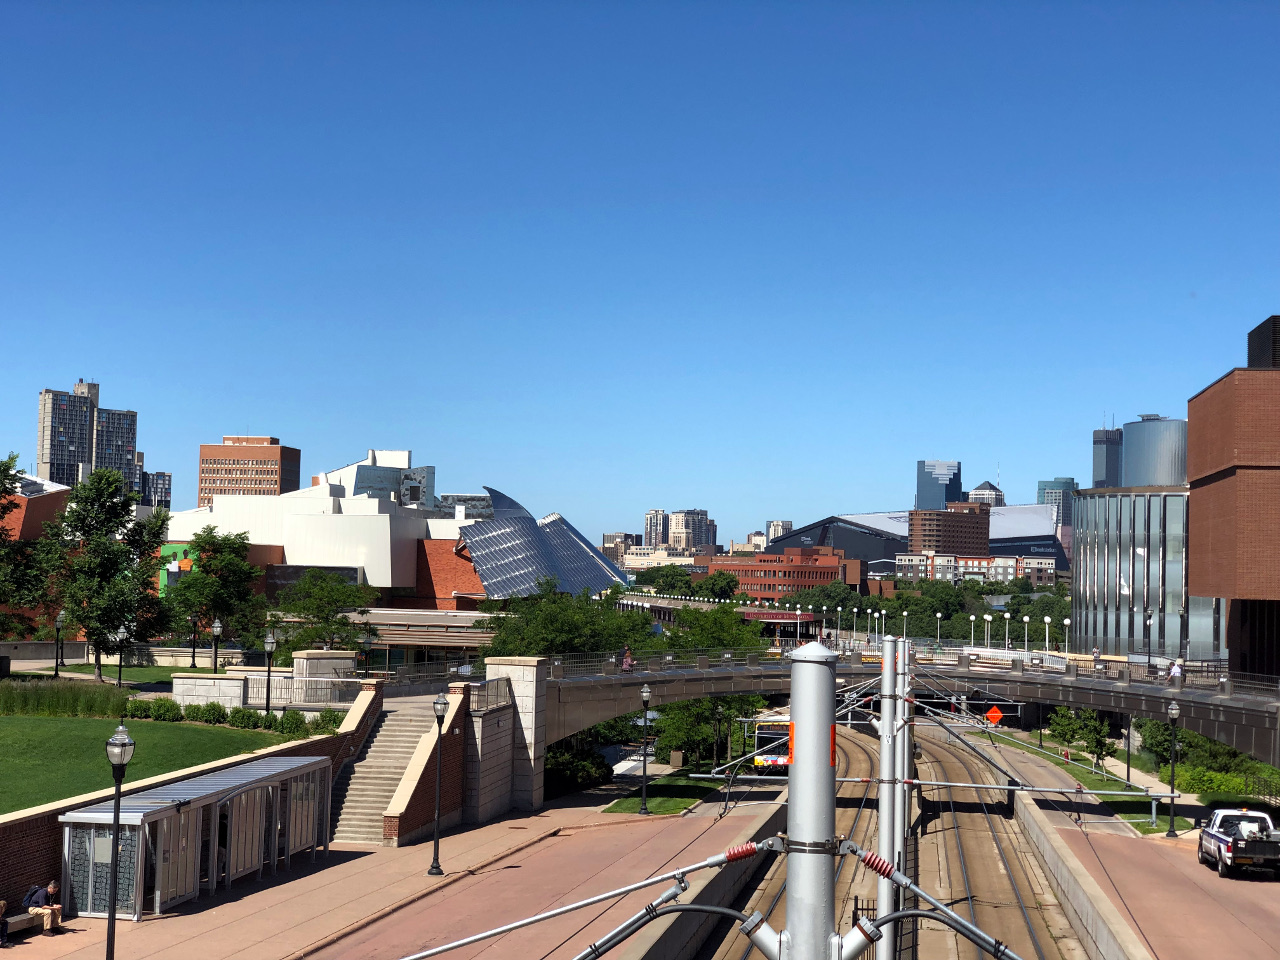 2019 Dev-Jam: Picture of Downtown Minneapolis from UMN